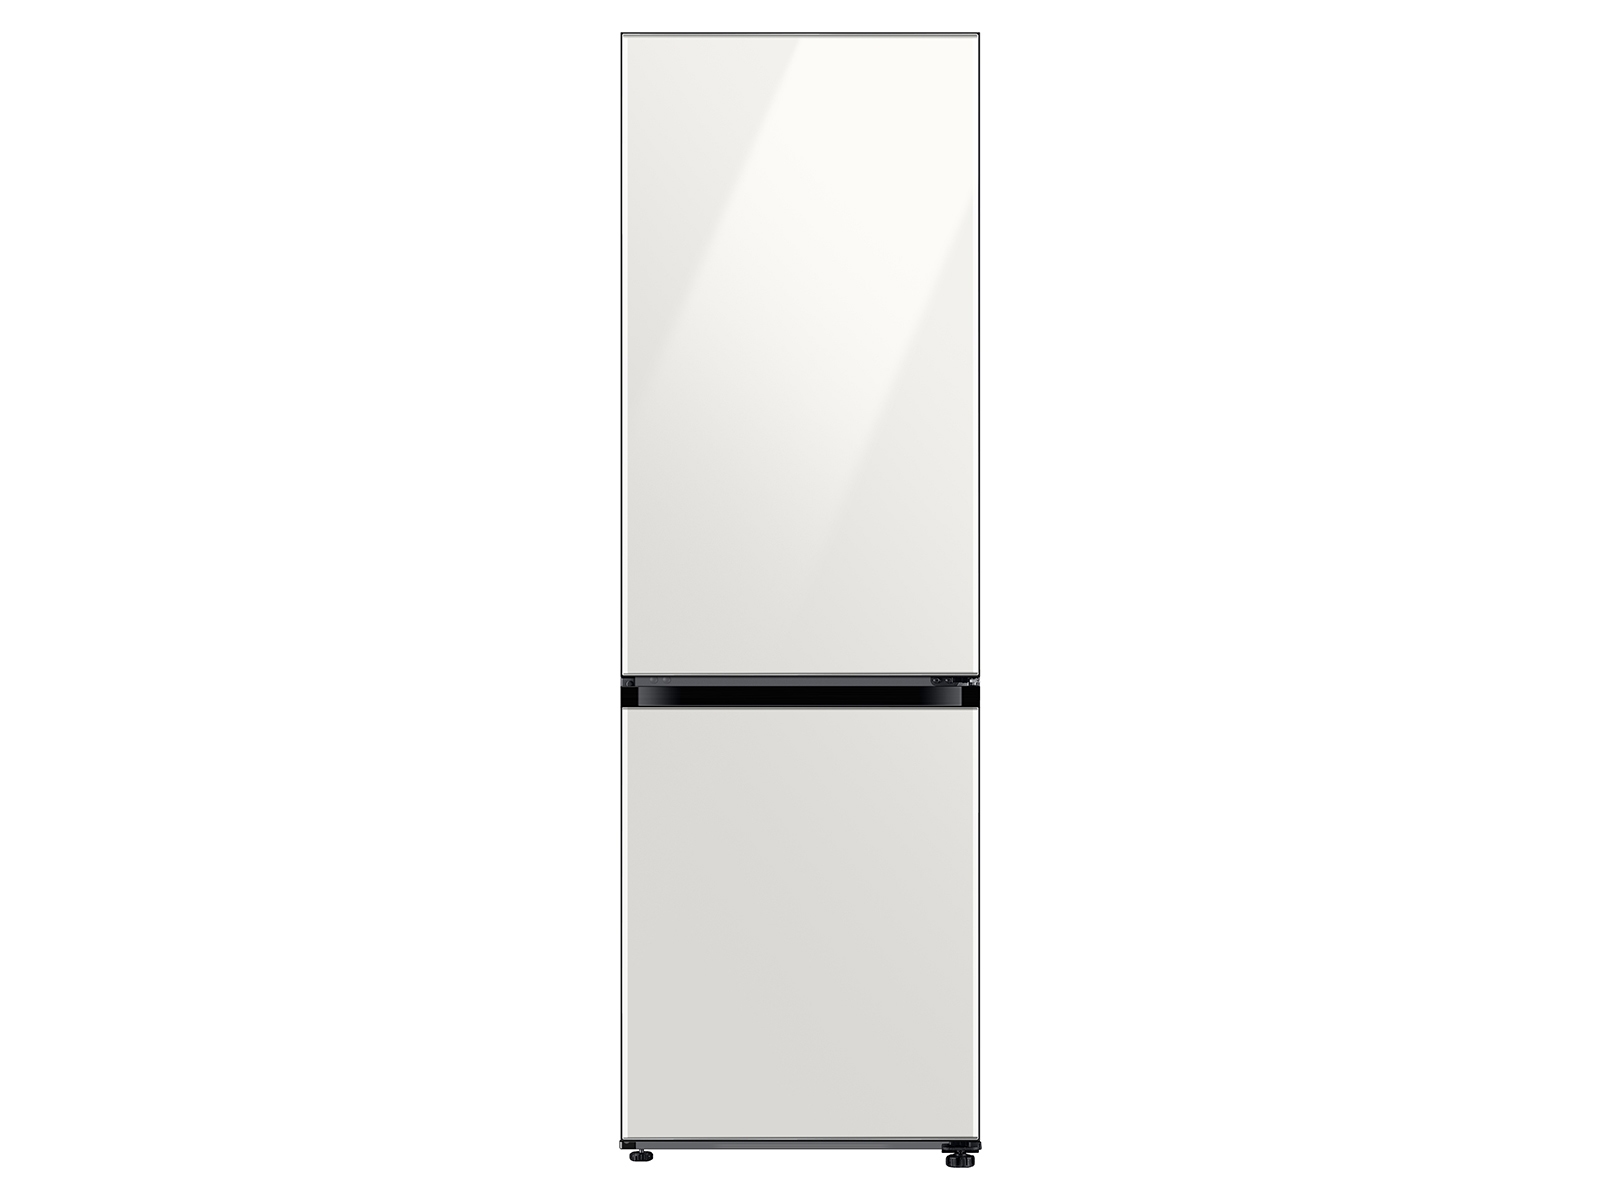 12.0 cu. Ft. Bespoke Bottom Freezer Refrigerator with Flexible Design in  White Glass - RB12A300635/AA